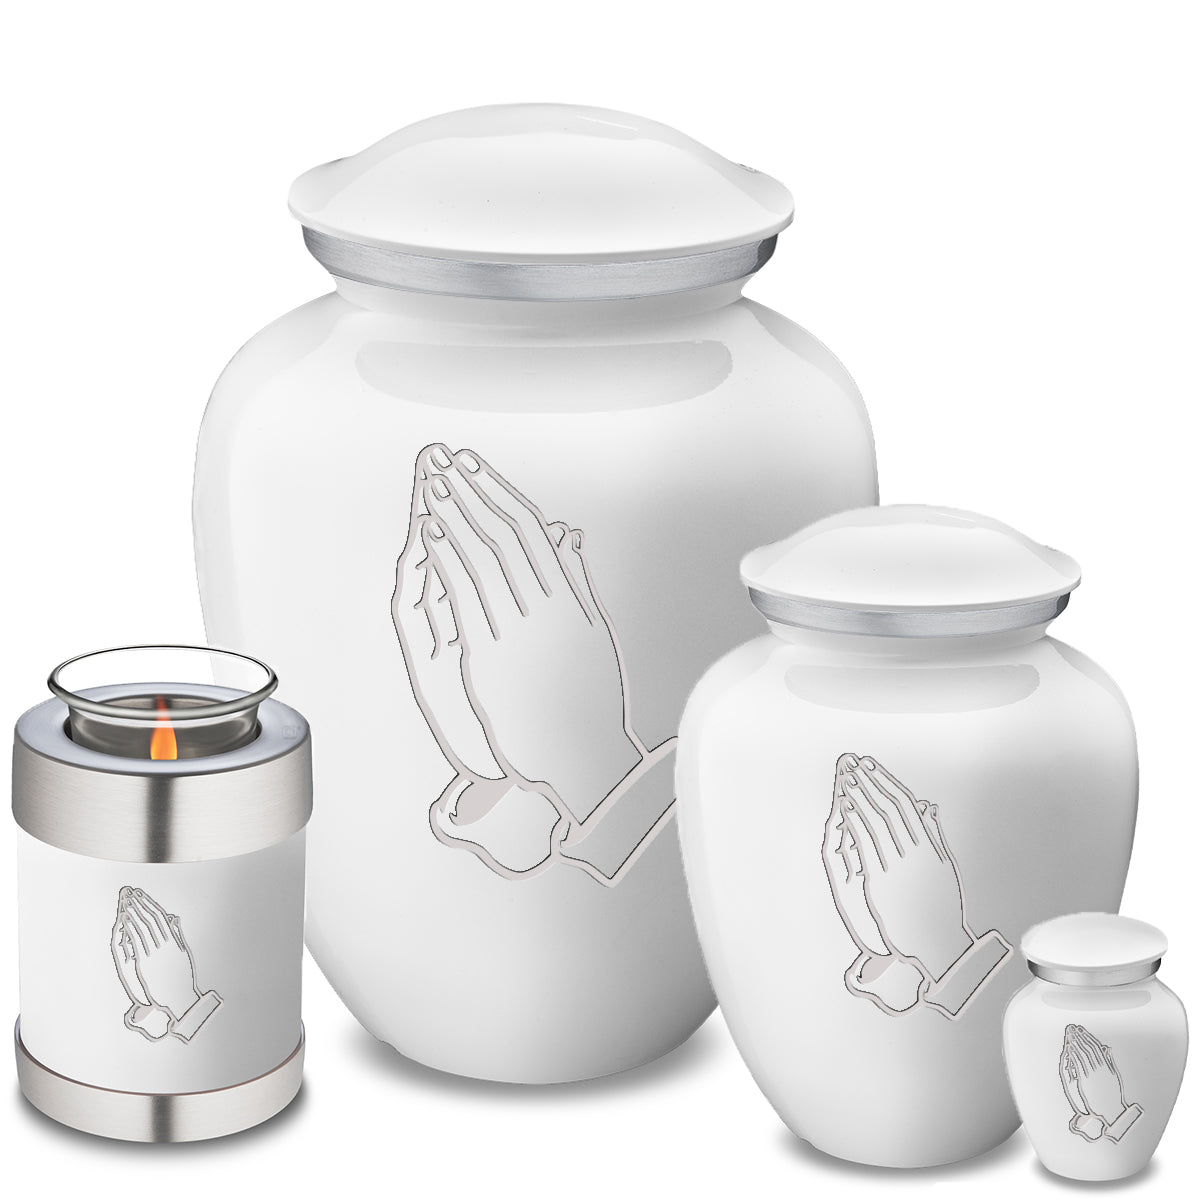 Adult Embrace White Praying Hands Cremation Urn